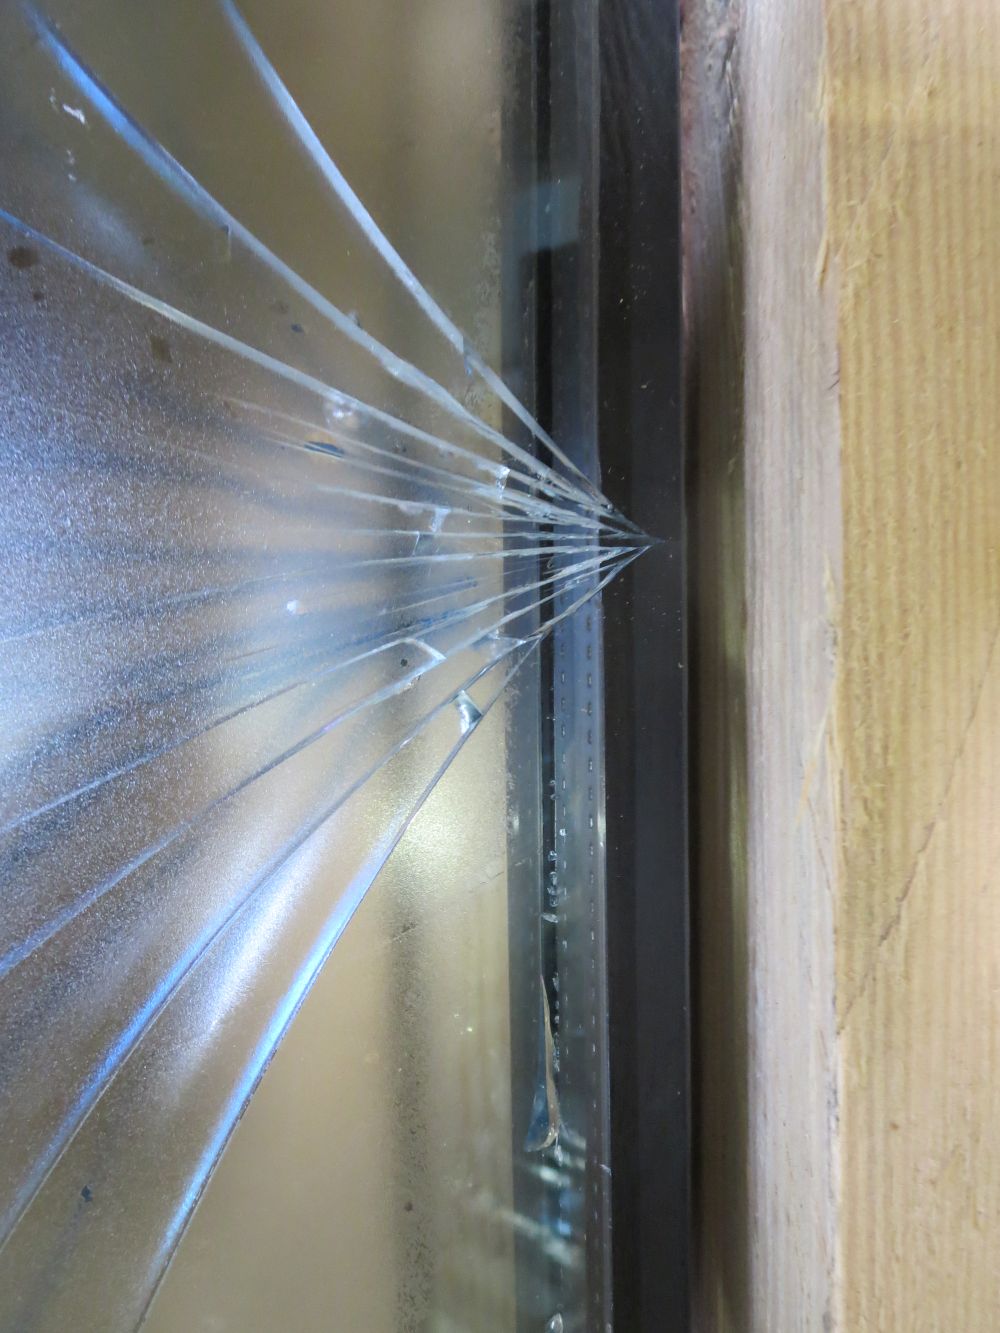 Thermal palm fracture on the back of the insulating glass due to increased temperature load (> 150 °C).